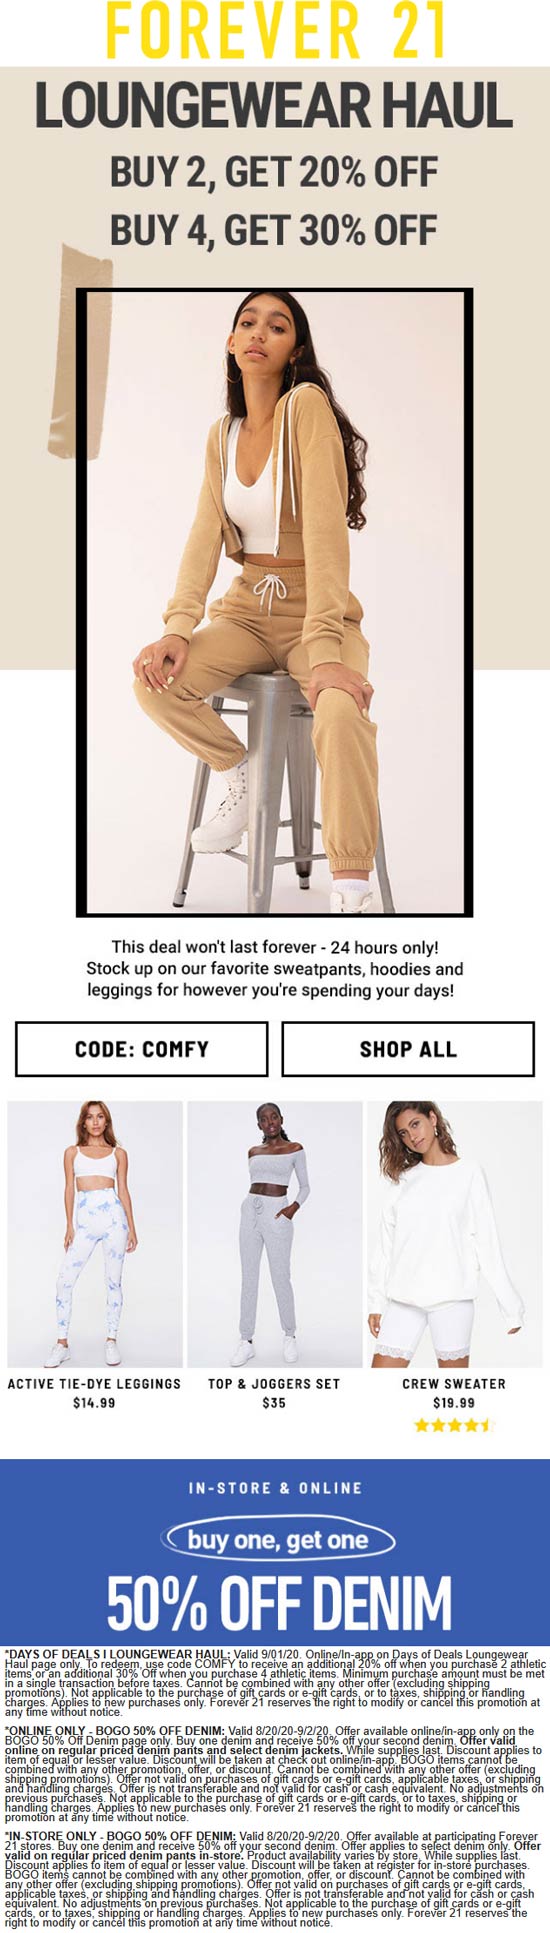 Forever 21 stores Coupon  20-30% off 2+ loungewear today at Forever 21 via promo code COMFY #forever21 